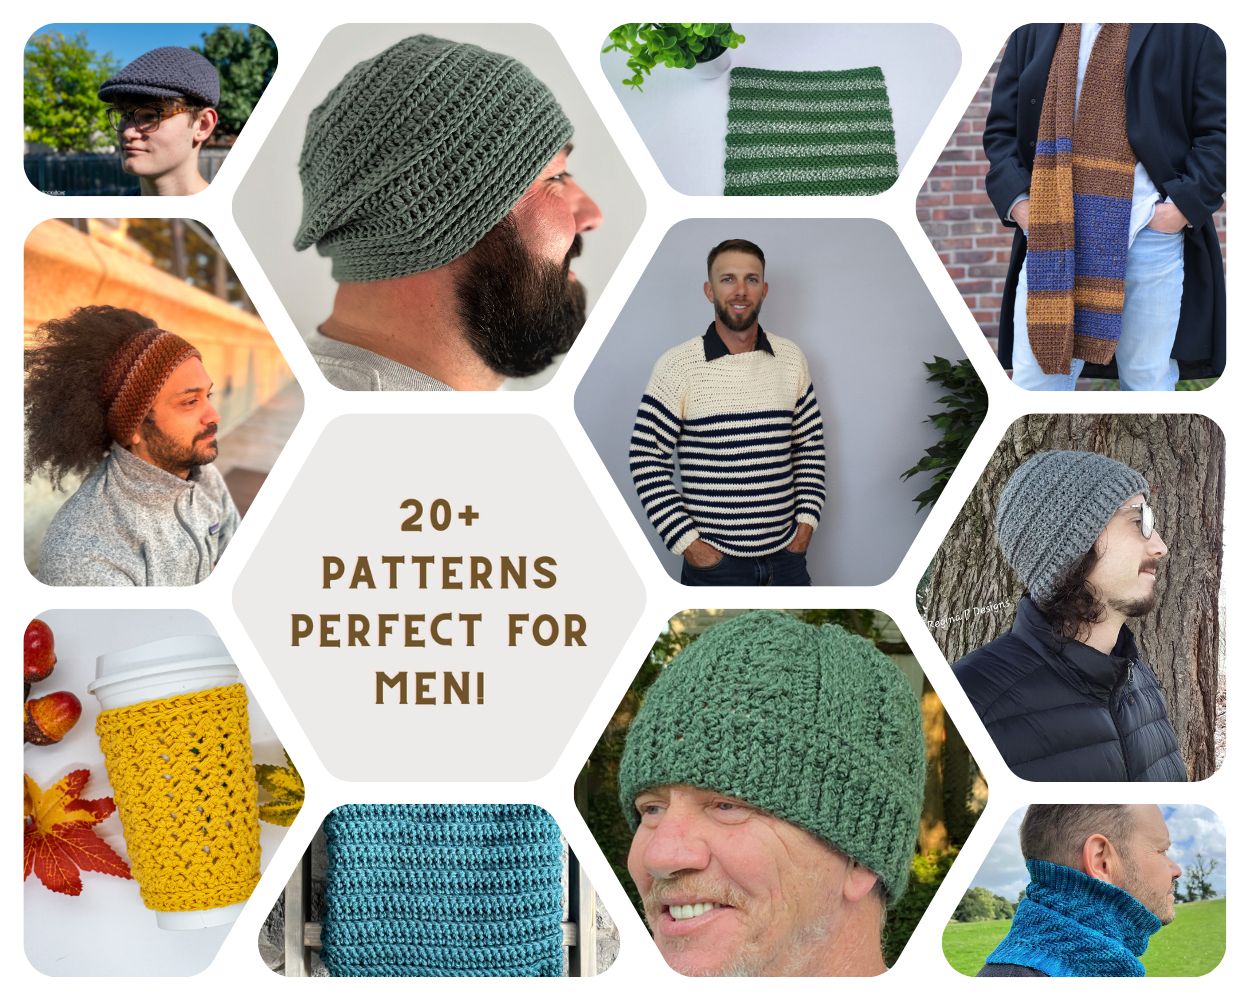 Why everybody needs a crochet bucket hat for their daily walk